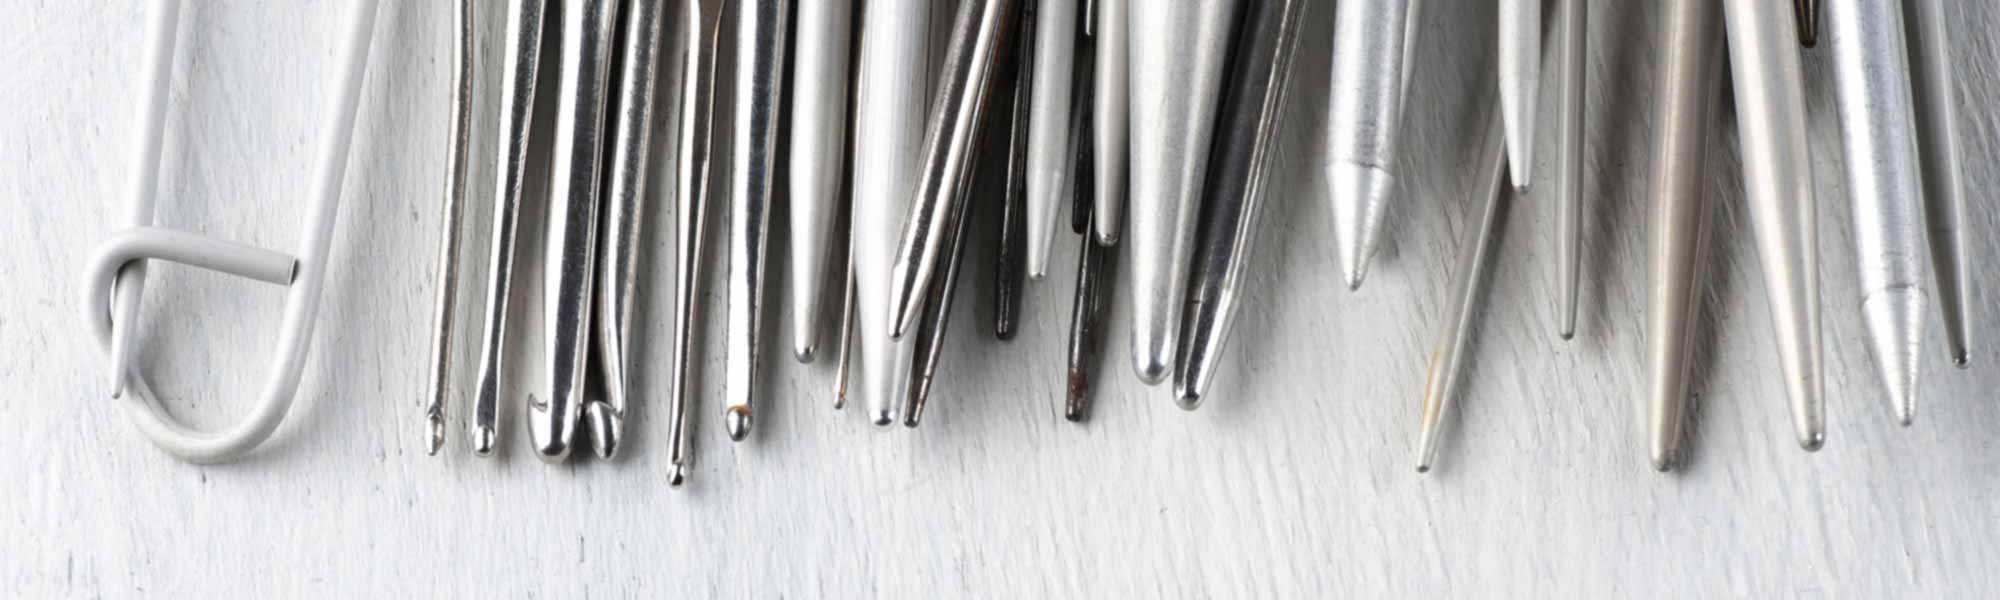 Metal Yarn Needles - For Small Hands